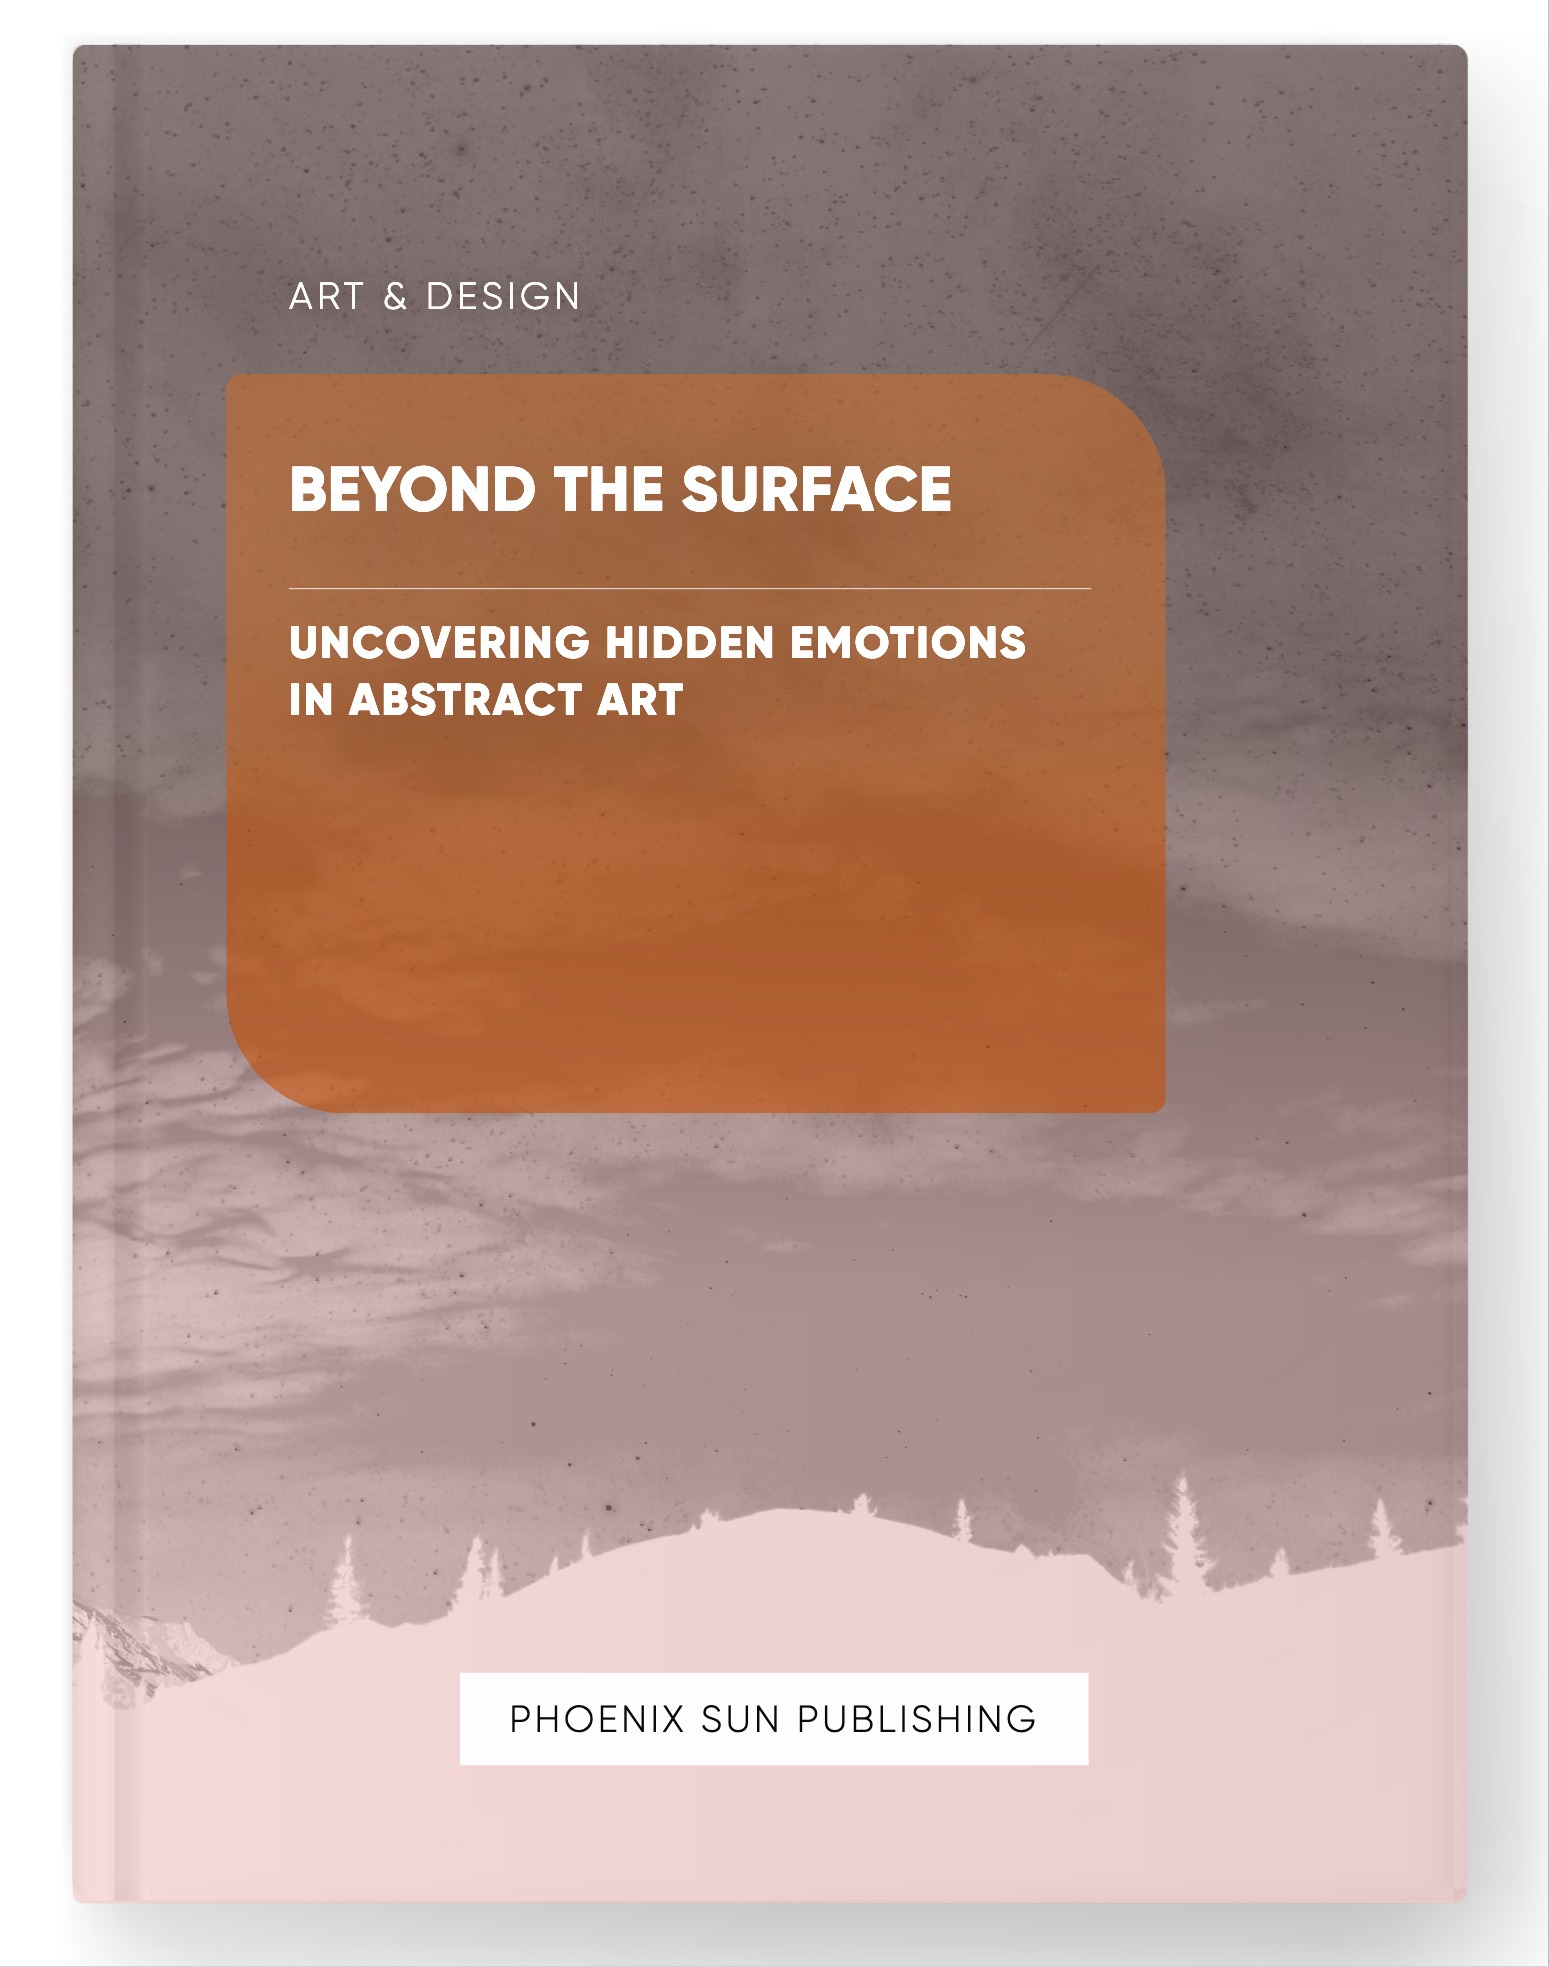 Beyond the Surface – Uncovering Hidden Emotions in Abstract Art